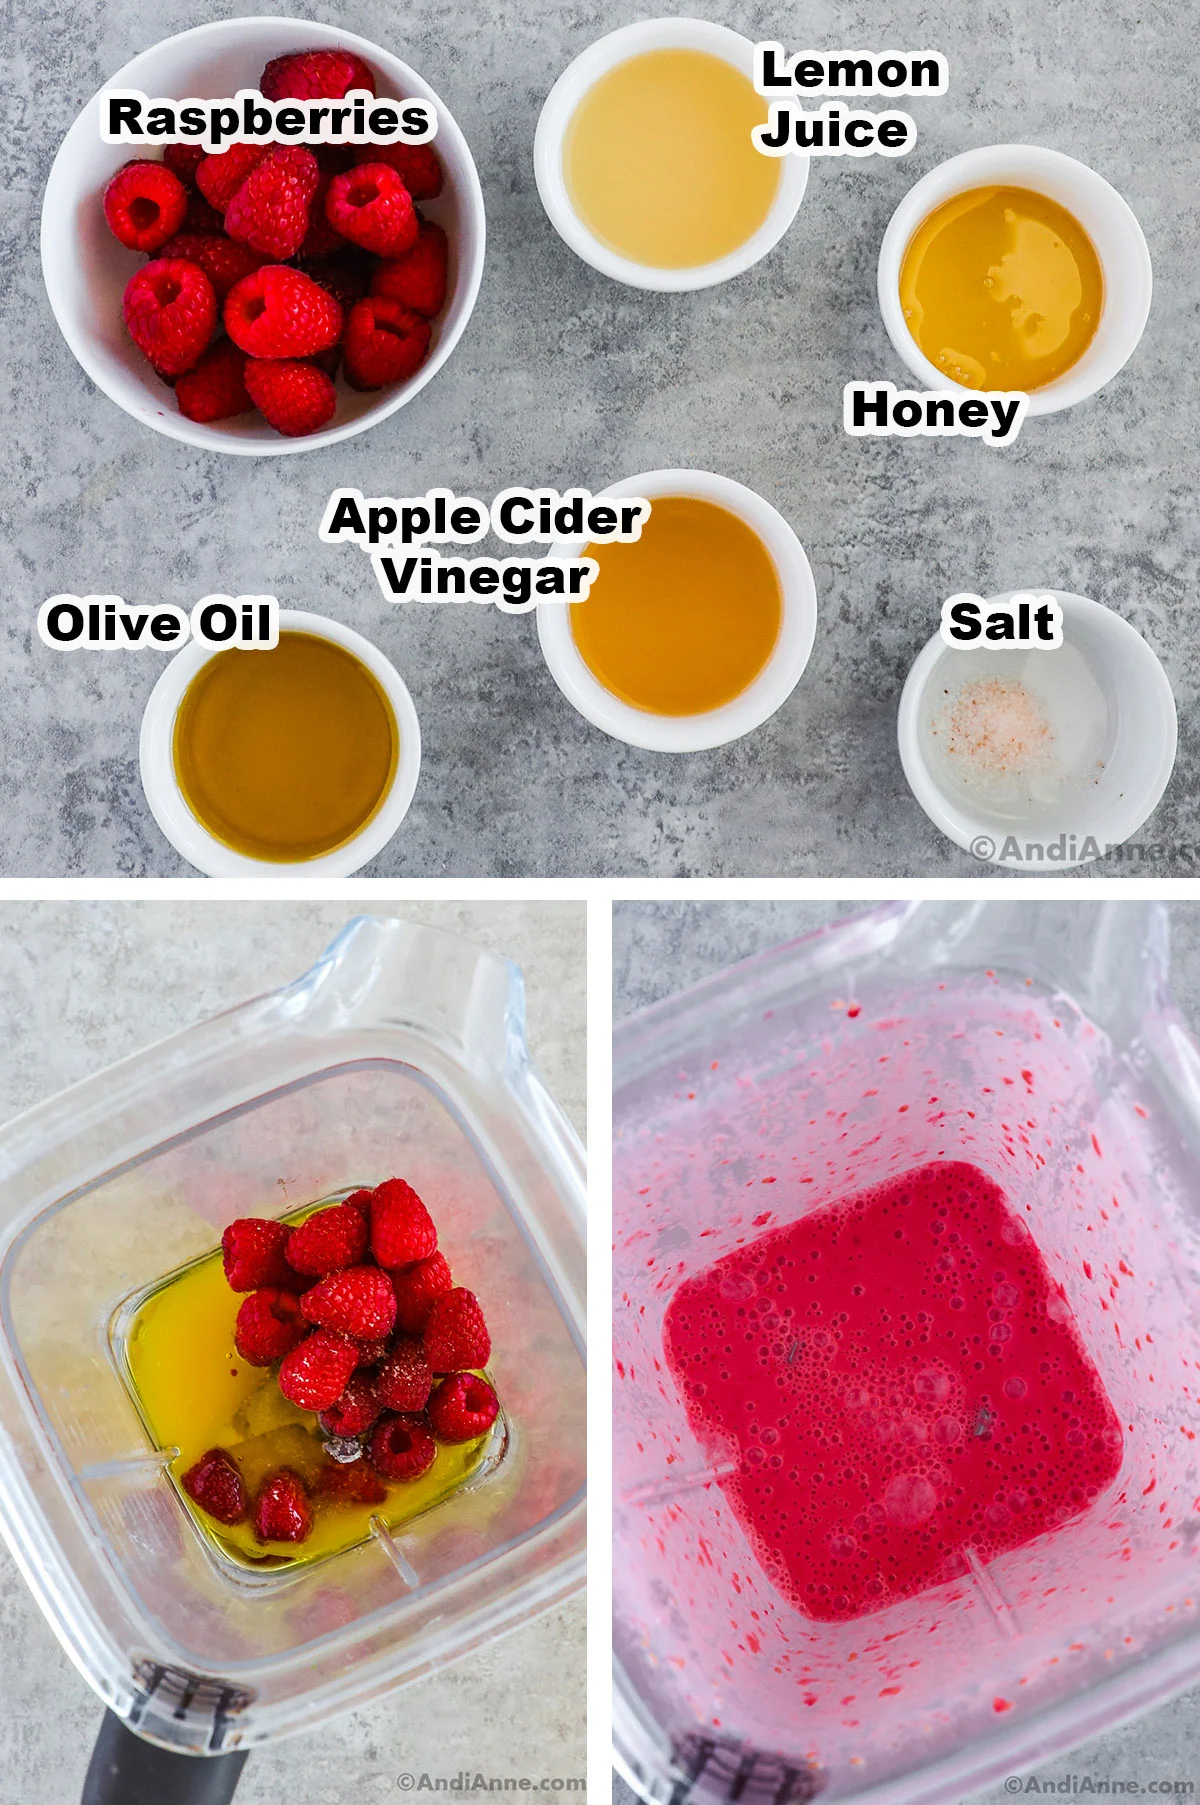 Three images, first is bowl of ingredients including bowls of raspberries, lemon juice, honey, olive oil, apple cider vinegar, and salt. Last two images are a blender, first with all ingredients dumped in, second all blended to a red liquid.